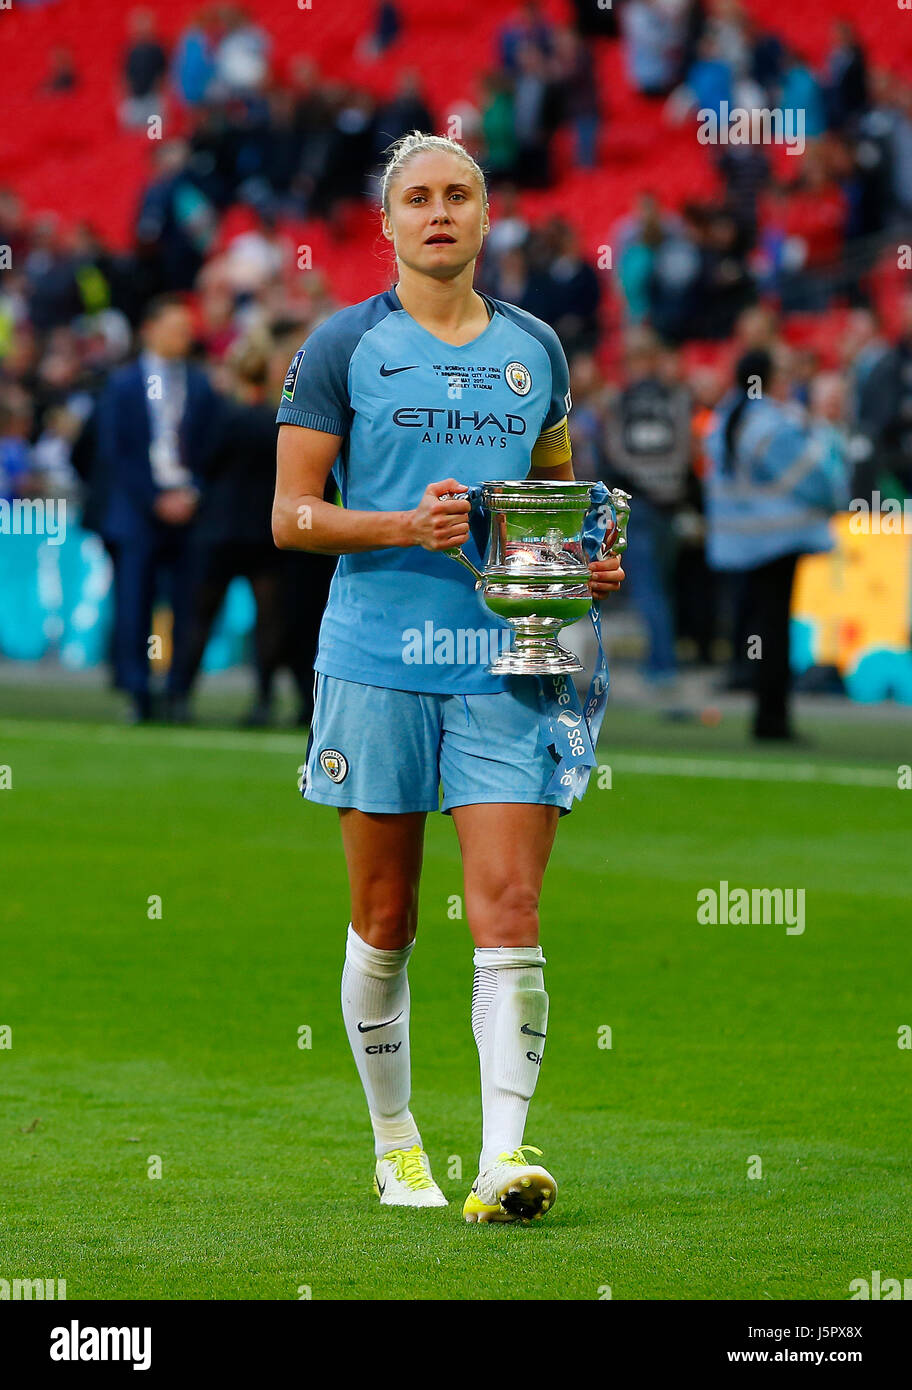 Manchester City captain Steph Houghton  kisses the cup during the SSE Women's FA Cup Final match between Birmingham City and Manchester City at Wembley Stadium in London. 13 May 2017 EDITORIAL USE ONLY No merchandising. For Football images FA and Premier League restrictions apply inc. no internet/mobile usage without FAPL license - for details contact Football Dataco Stock Photo